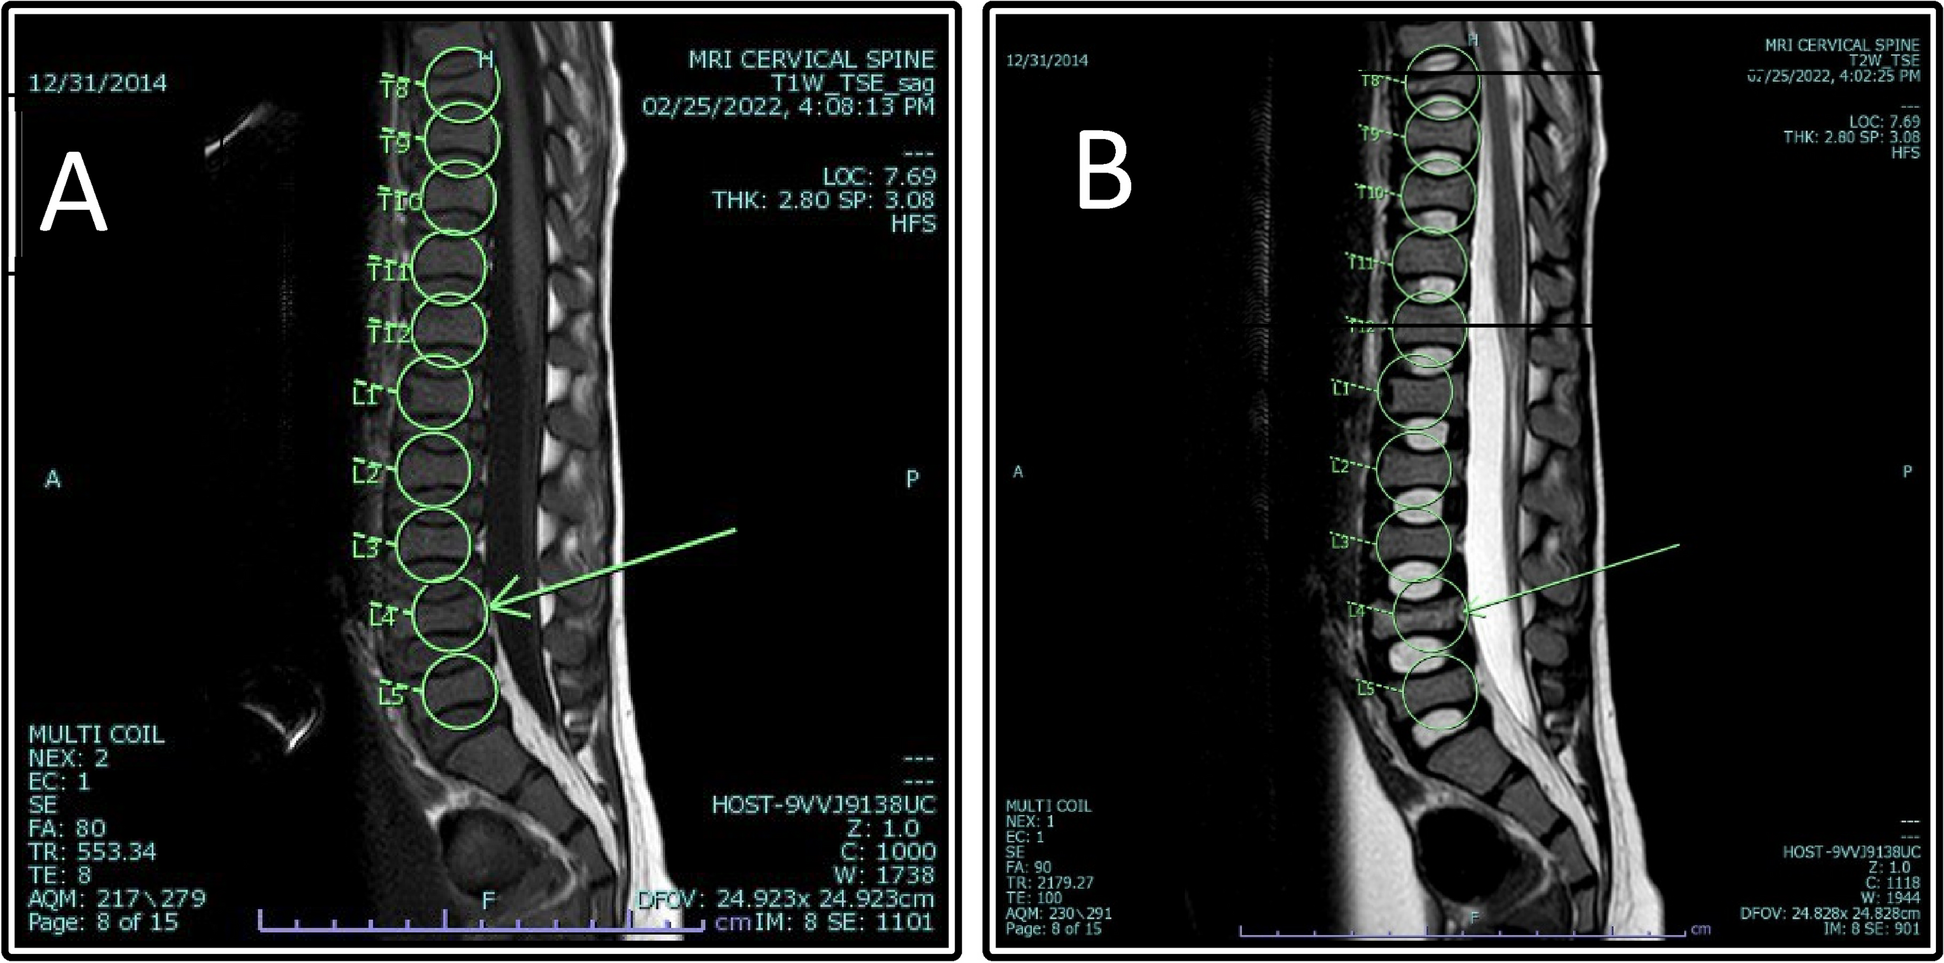 Vertebral compression fracture as the only presentation sign of acute lymphoblastic leukemia: a case report